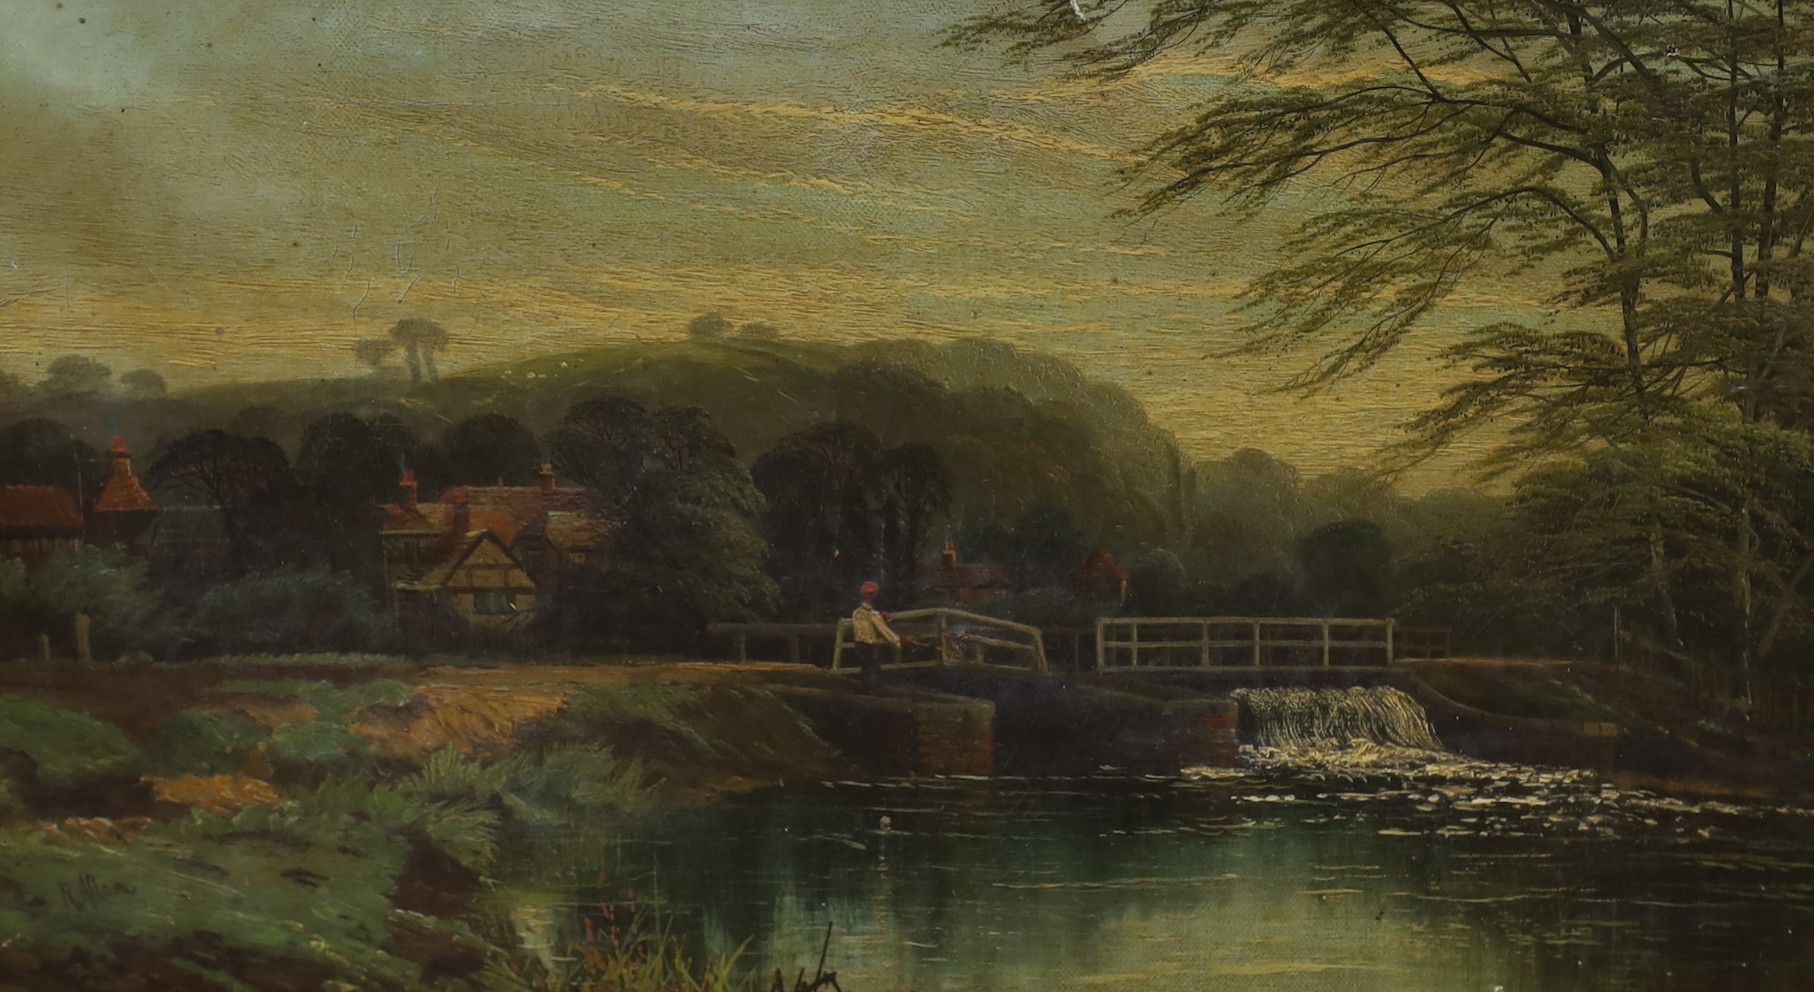 Richard Allam, oil on canvas, 'Loch gates at Guildford', signed, 26 x 46cm